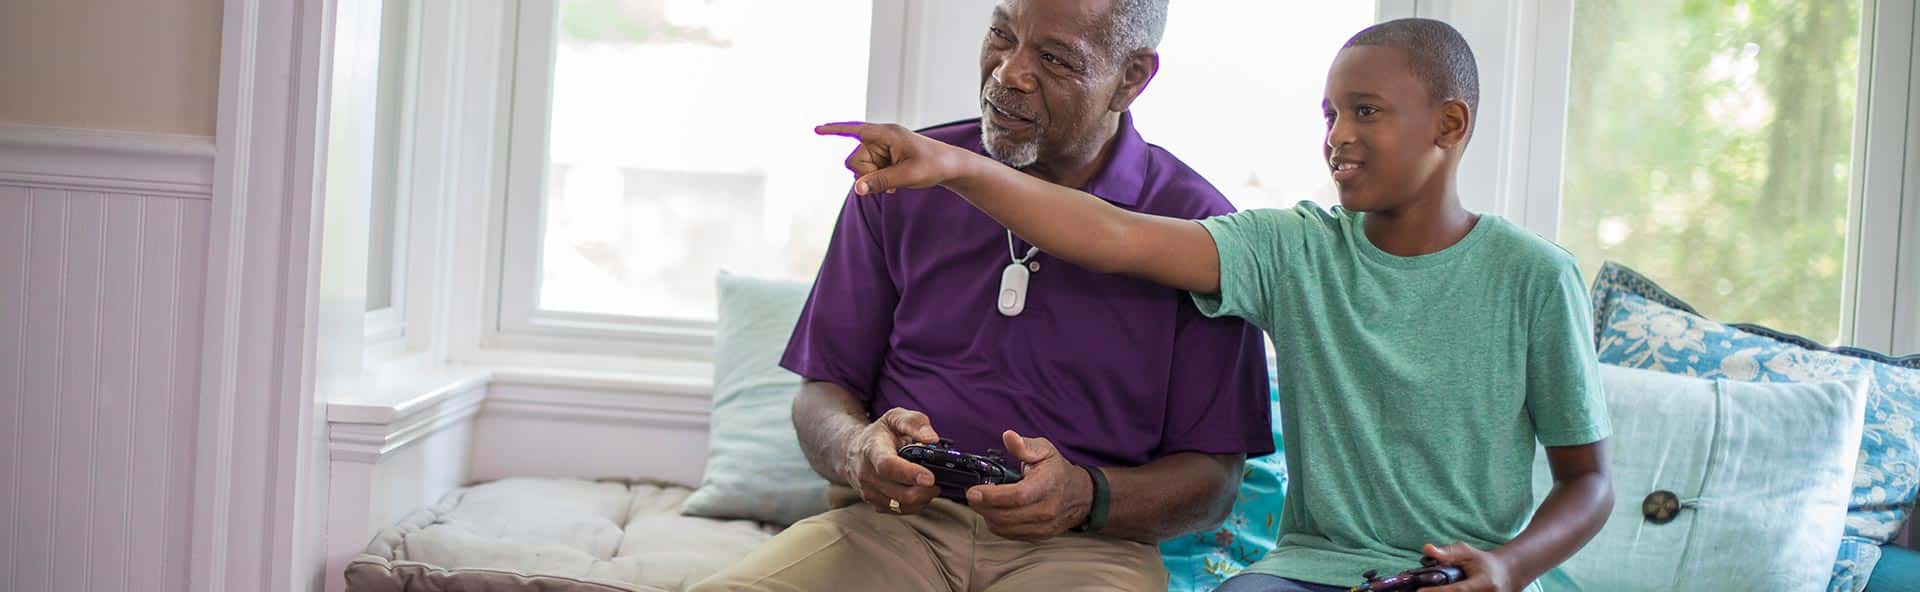 Emory  Healthy Aging Study6 Benefits of Playing Games - Emory